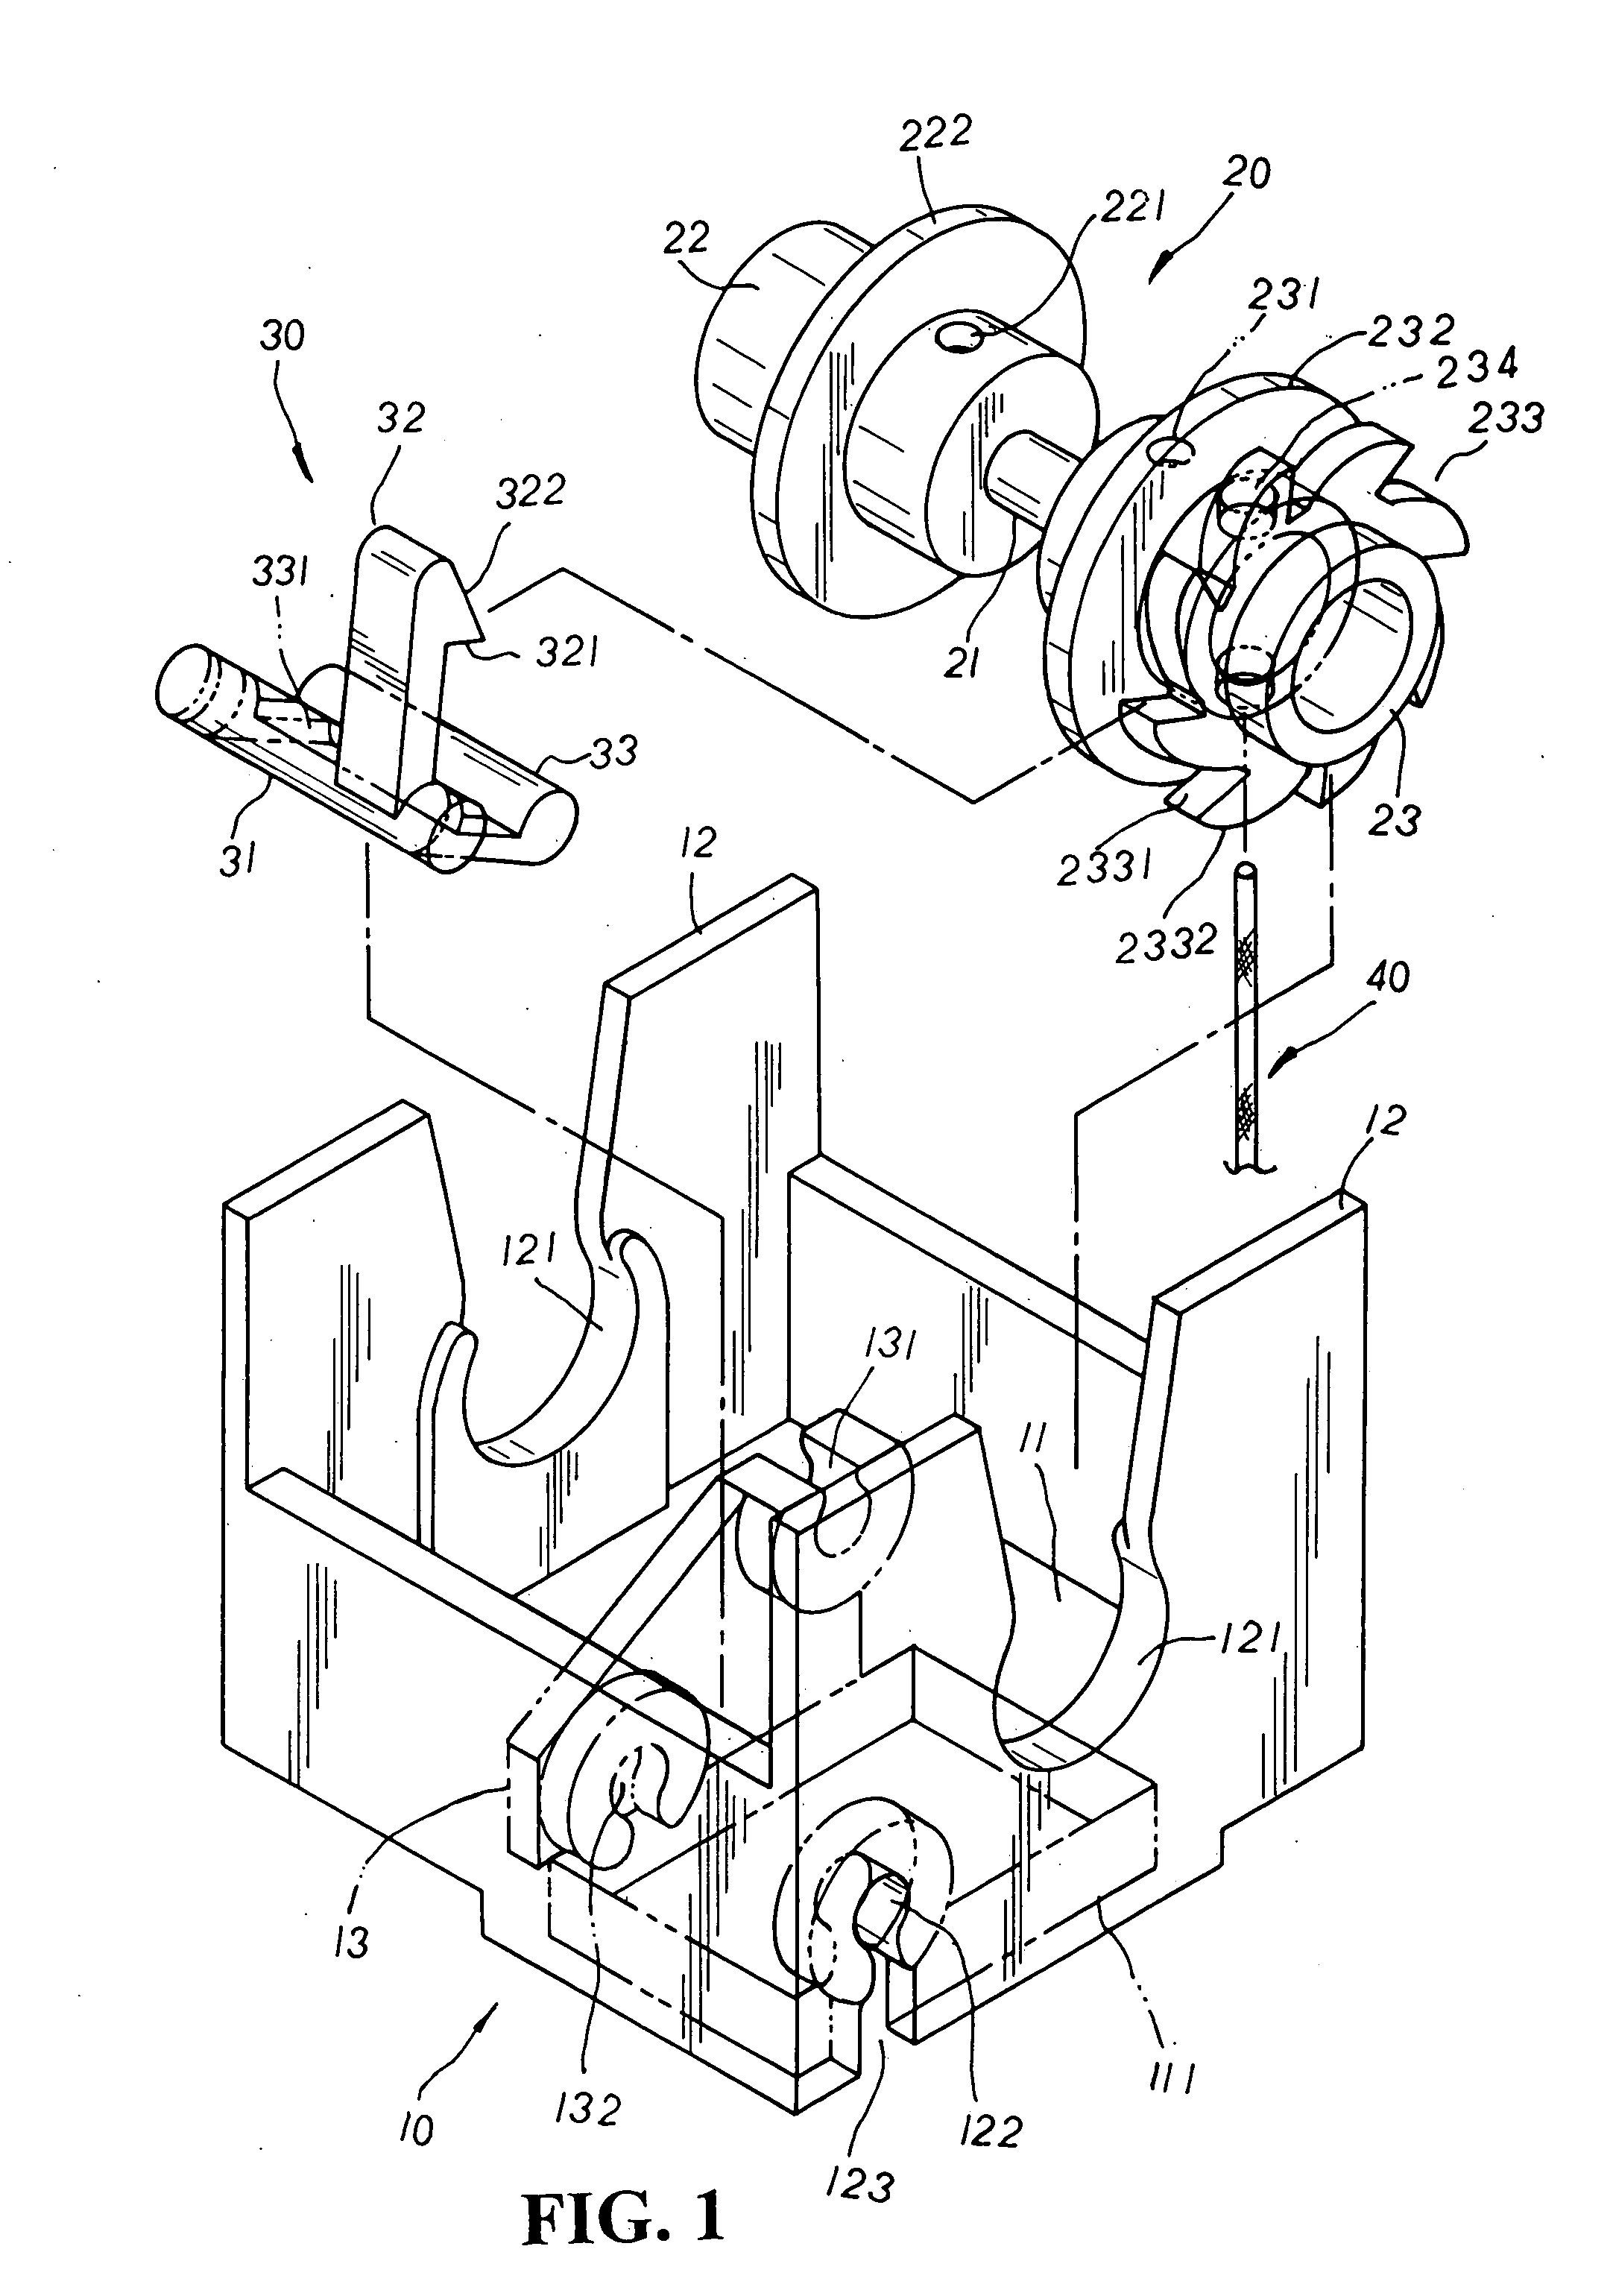 Pull cord operation mechanism for blinds